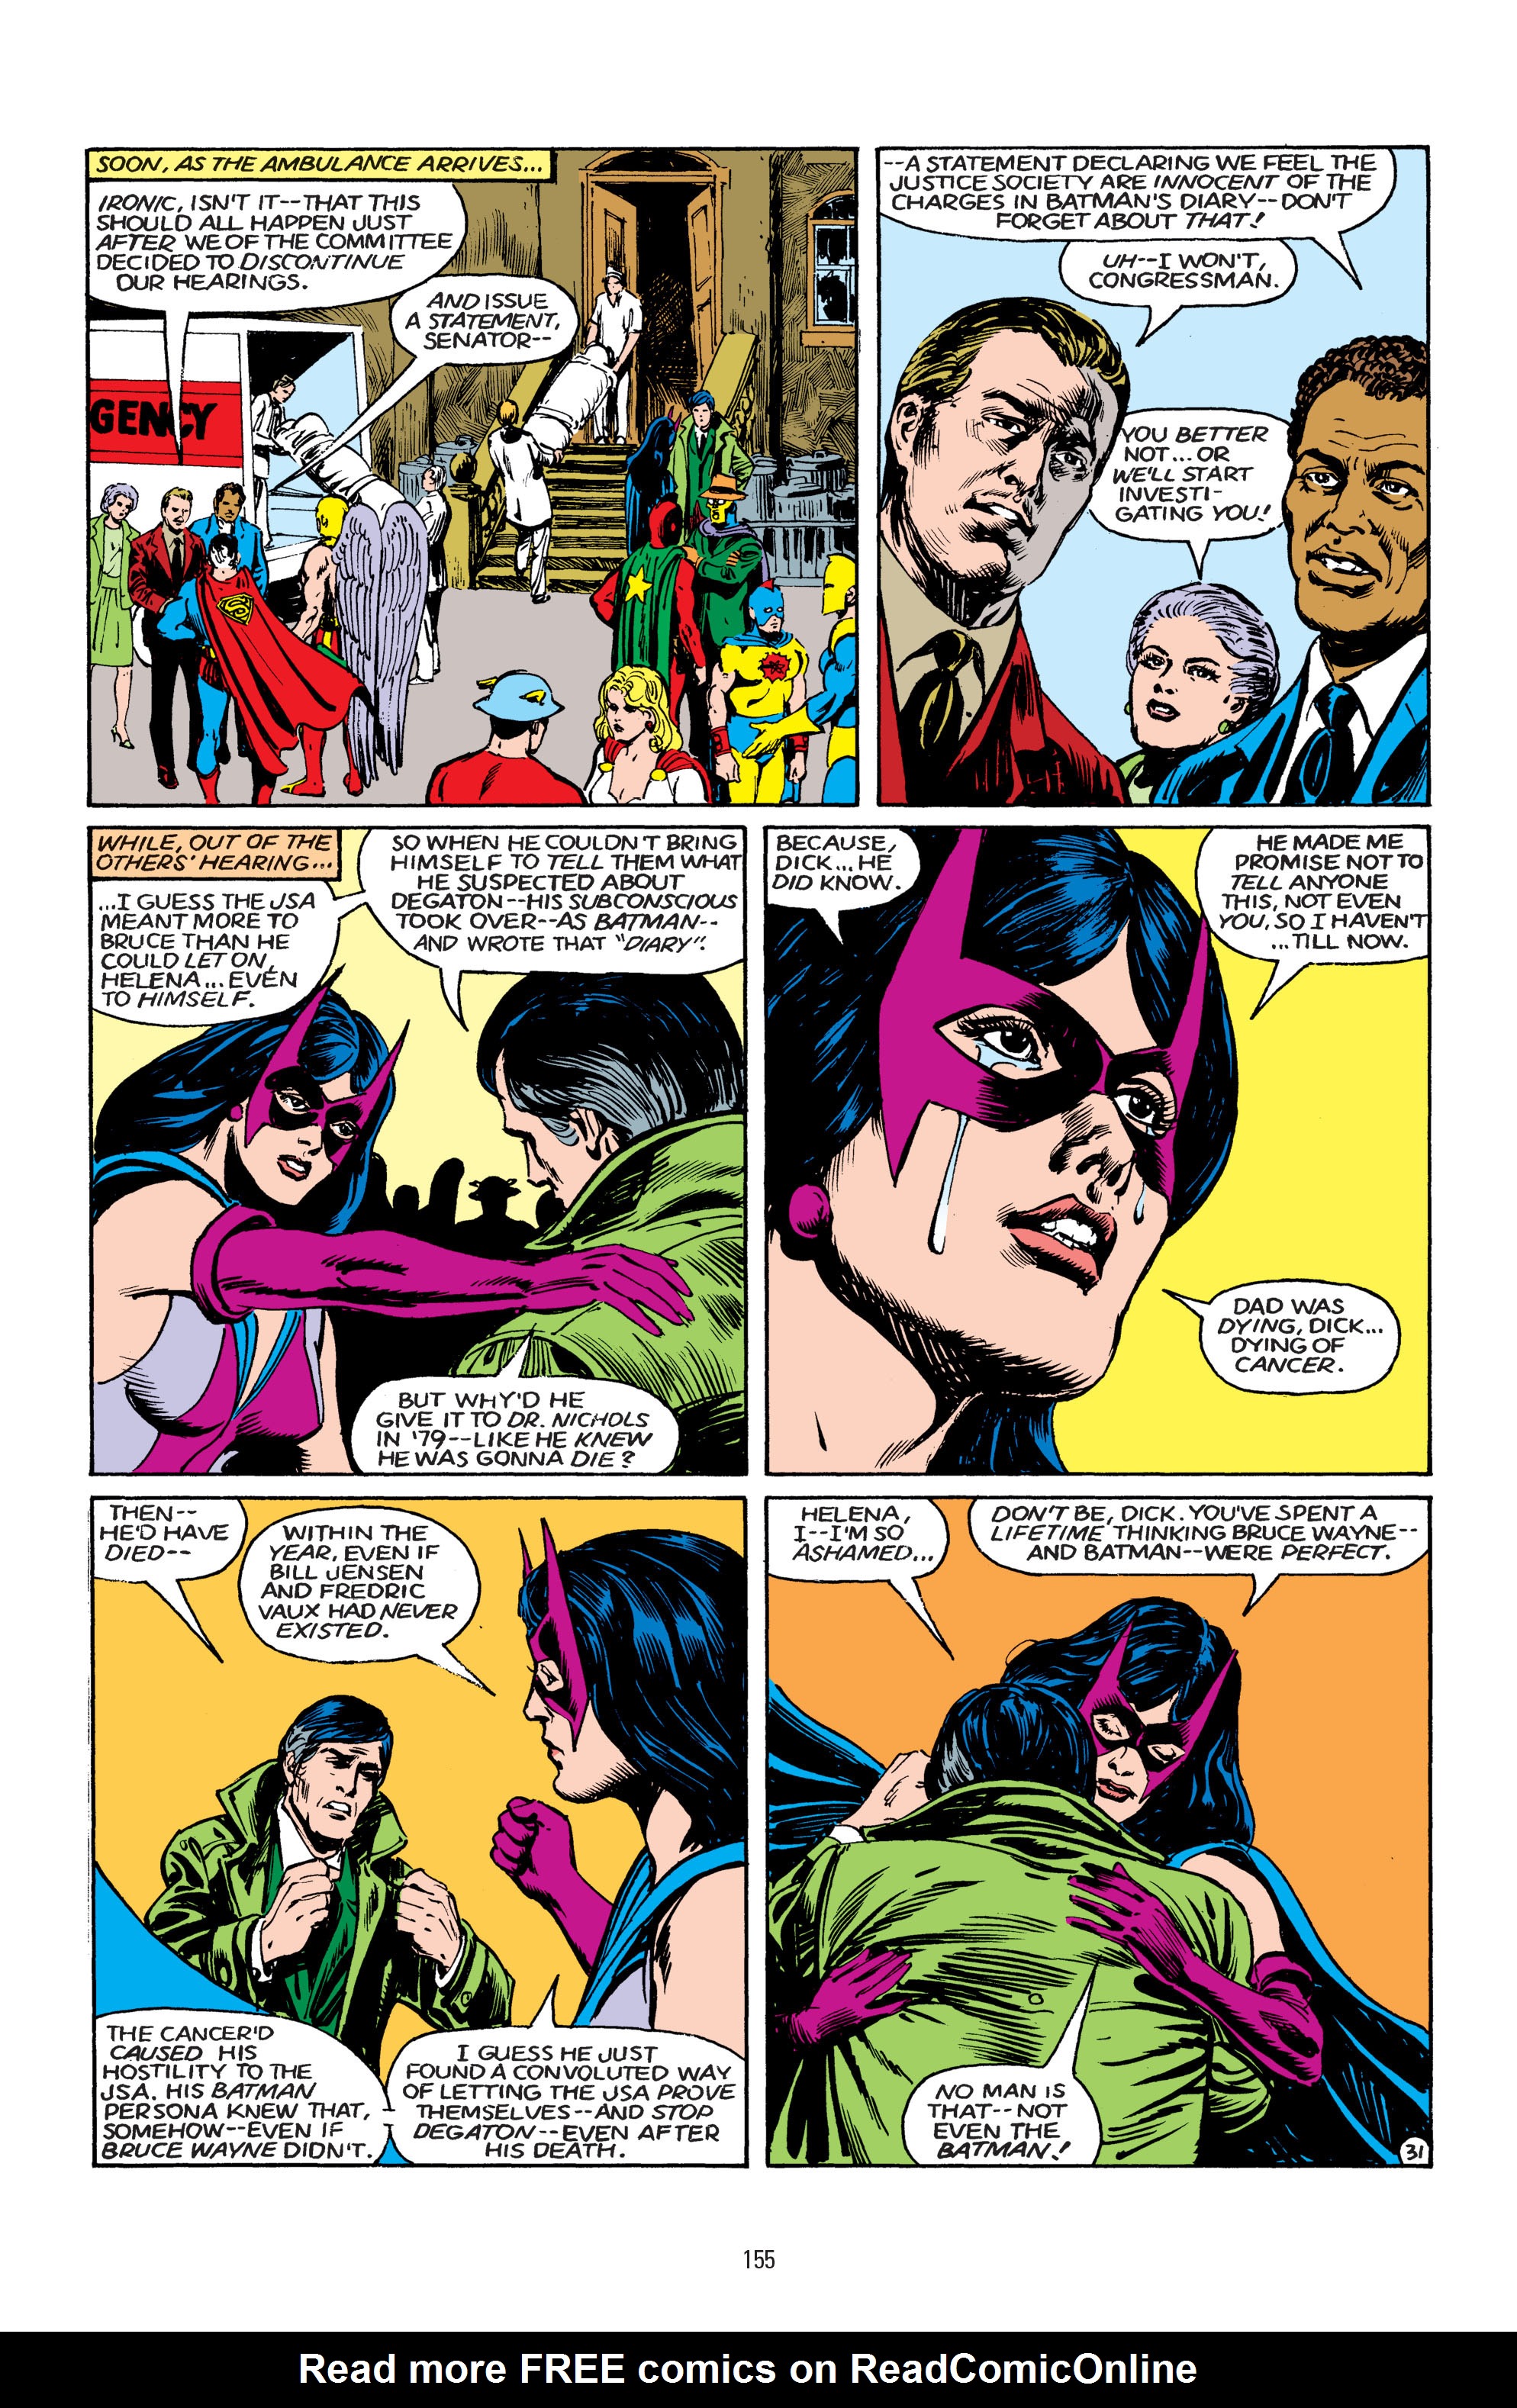 Read online America vs. the Justice Society comic -  Issue # TPB - 148